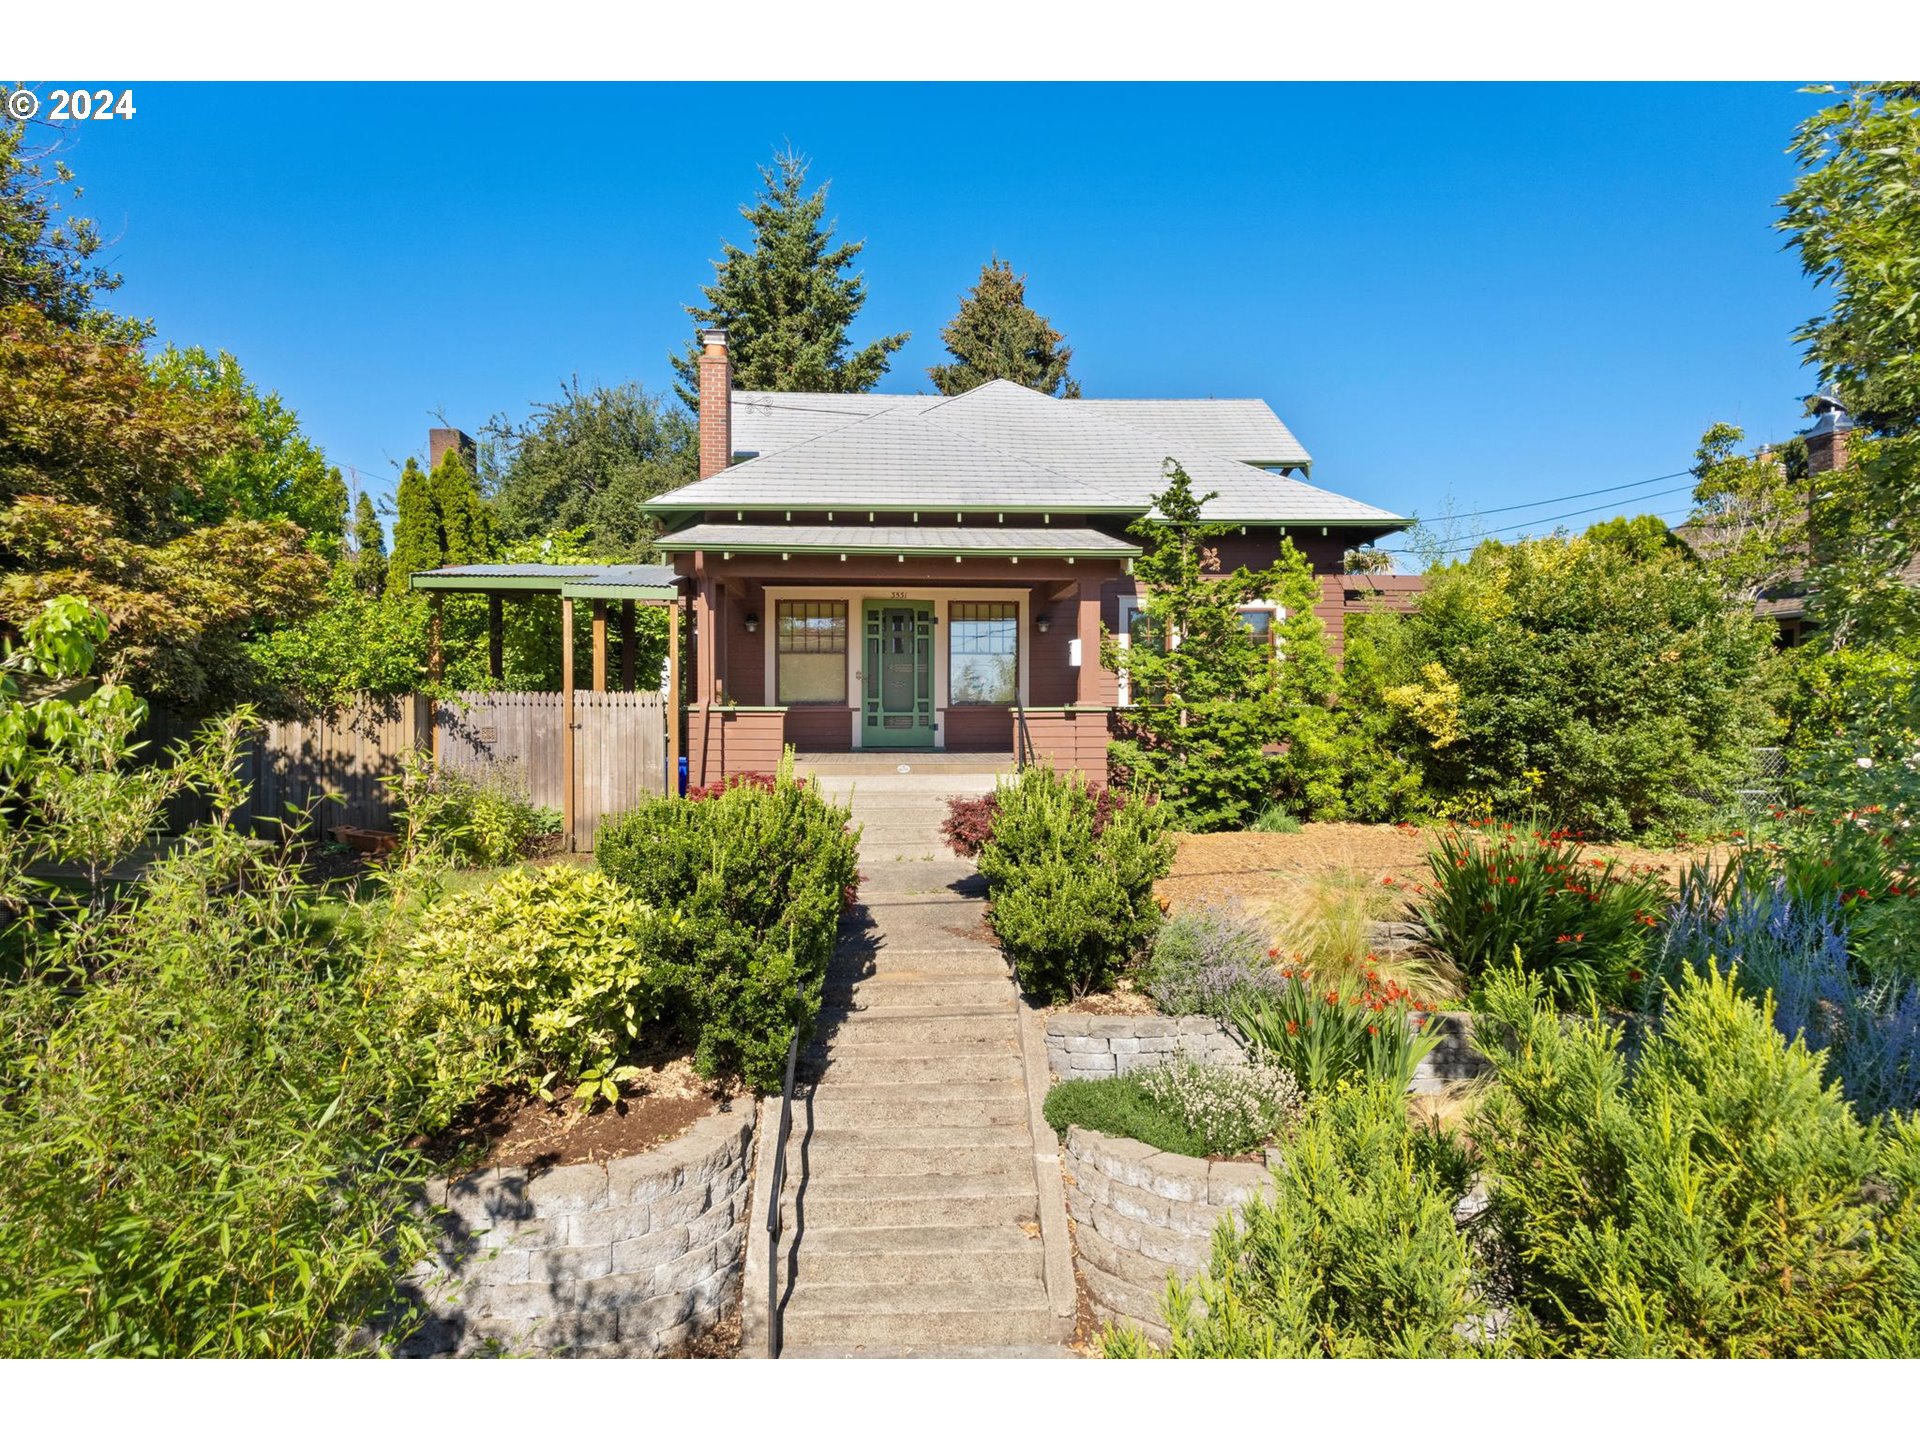 This one is truly special! An amazing opportunity to own a piece of Portland history! Perched high above the street on the 72nd greenway sits this wonderful, architecturally significant craftsman bungalow. A spectacular example of timeless design featuring handcrafted details, natural unpainted woodwork, leaded and stained glass and beamed ceilings. Show stopping formal spaces with gorgeous tiled fireplace, built-ins and French doors that open onto the large wrap around front porch for easy indoor/outdoor living. Generous rooms throughout including spacious upper level with tall ceilings, large bedrooms, huge primary closets, remodeled bathroom and fun paneled loft room. Main level bedroom and bath and versatile lower floor with outside entry. Thoughtful, period appropriate updates and the preservation of original details ensures lasting value. Enjoy the many outdoor spaces- terraced garden, private lawn, garden beds, kitchen deck and front porch. Fencing and mature plantings on all three sides creates a beautiful buffer from neighboring properties. Awesome Roseway location close to fun and convenient amenities on Sandy and Fremont- Fresh Love smoothies and sandwiches, Otto's pizza, Upright Brewing and Juniors Coffee just a stroll away plus all of the essentials nearby- grocery, hardware, banks and pharmacy, etc. [Home Energy Score = 5. HES Report at https://rpt.greenbuildingregistry.com/hes/OR10079582]